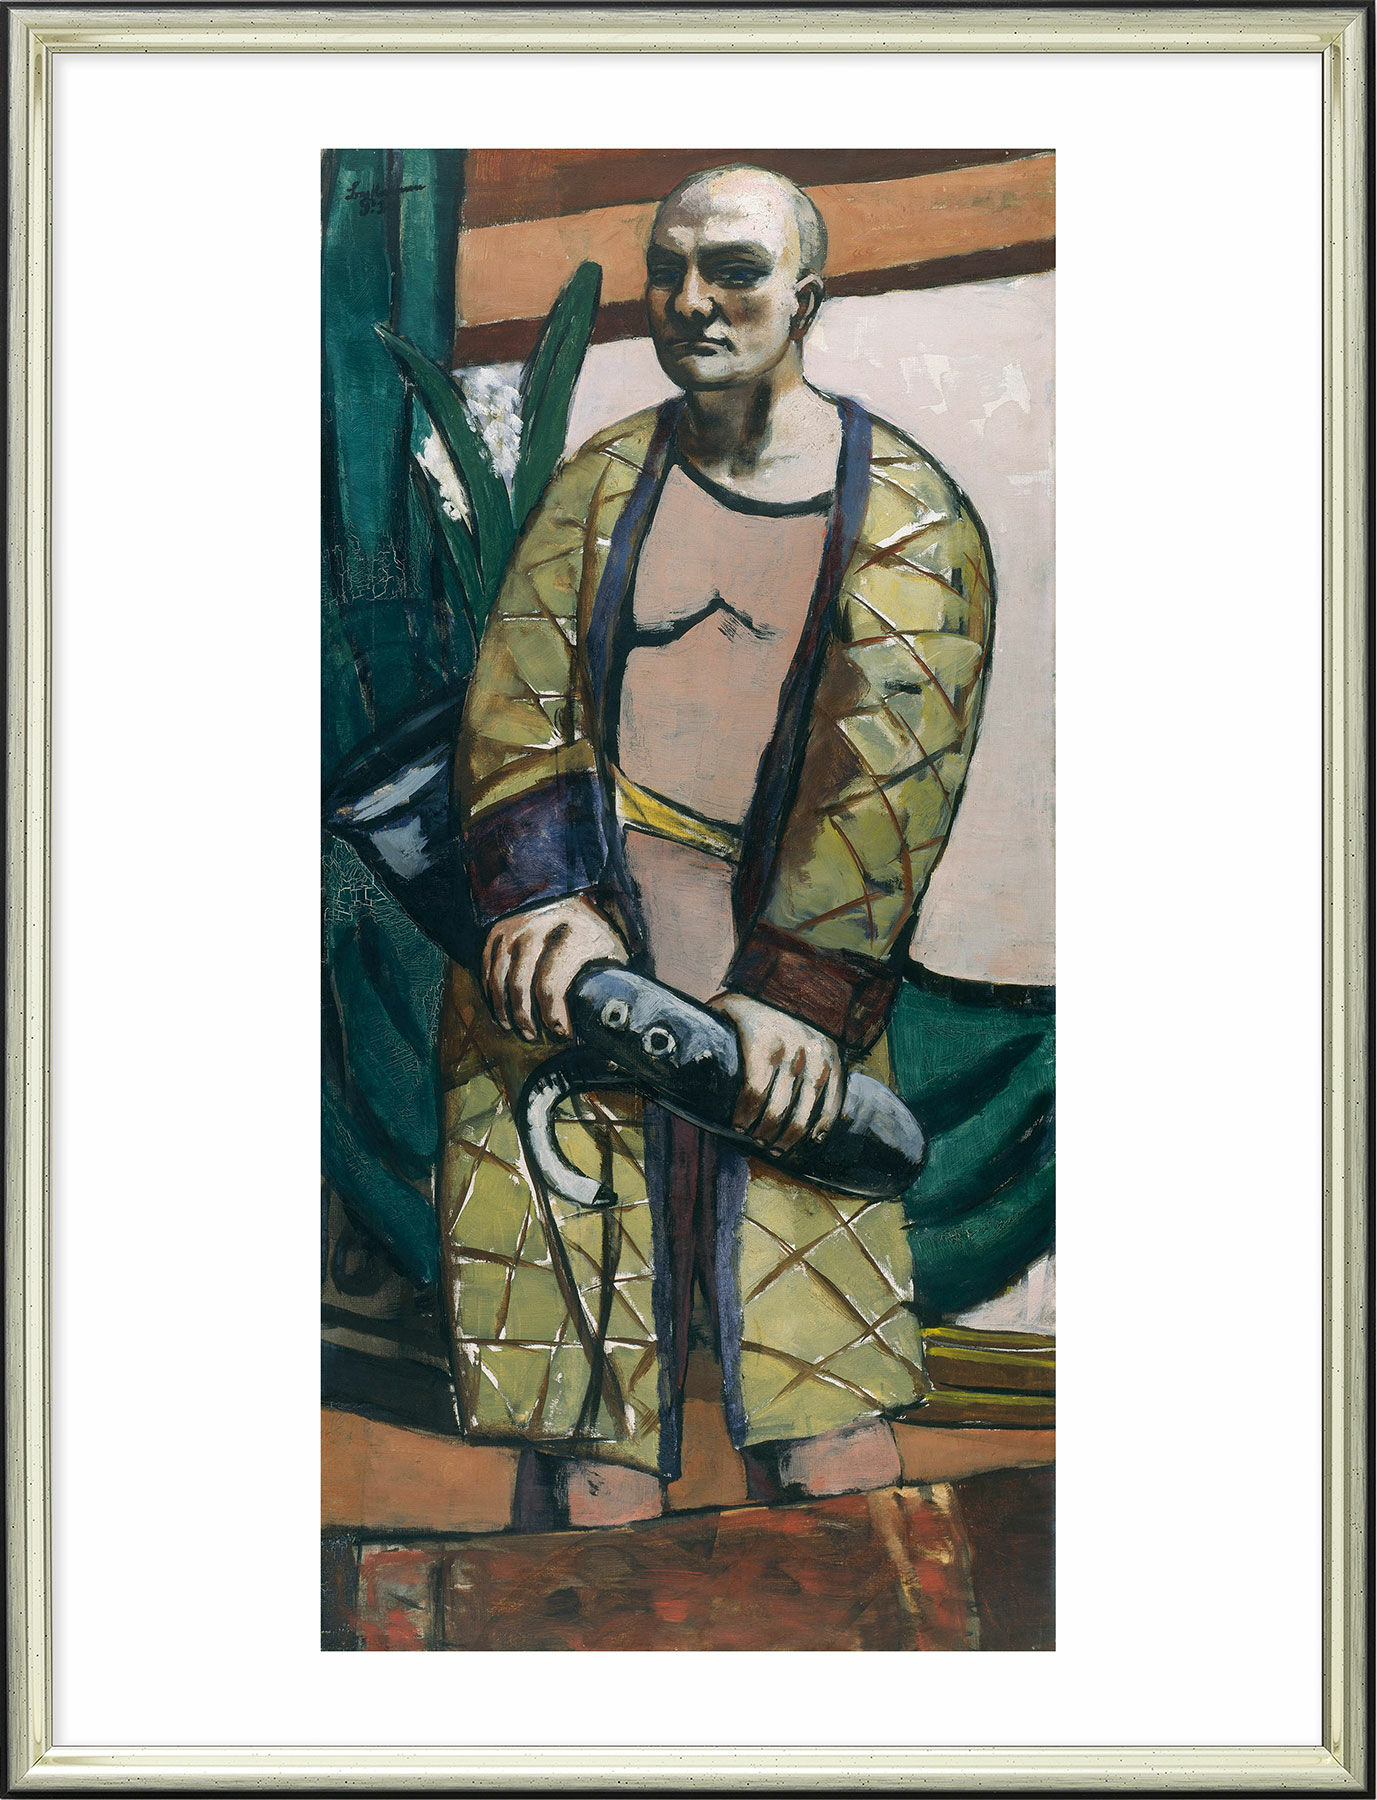 Picture "Self-Portrait with Saxophone" (1930), framed by Max Beckmann